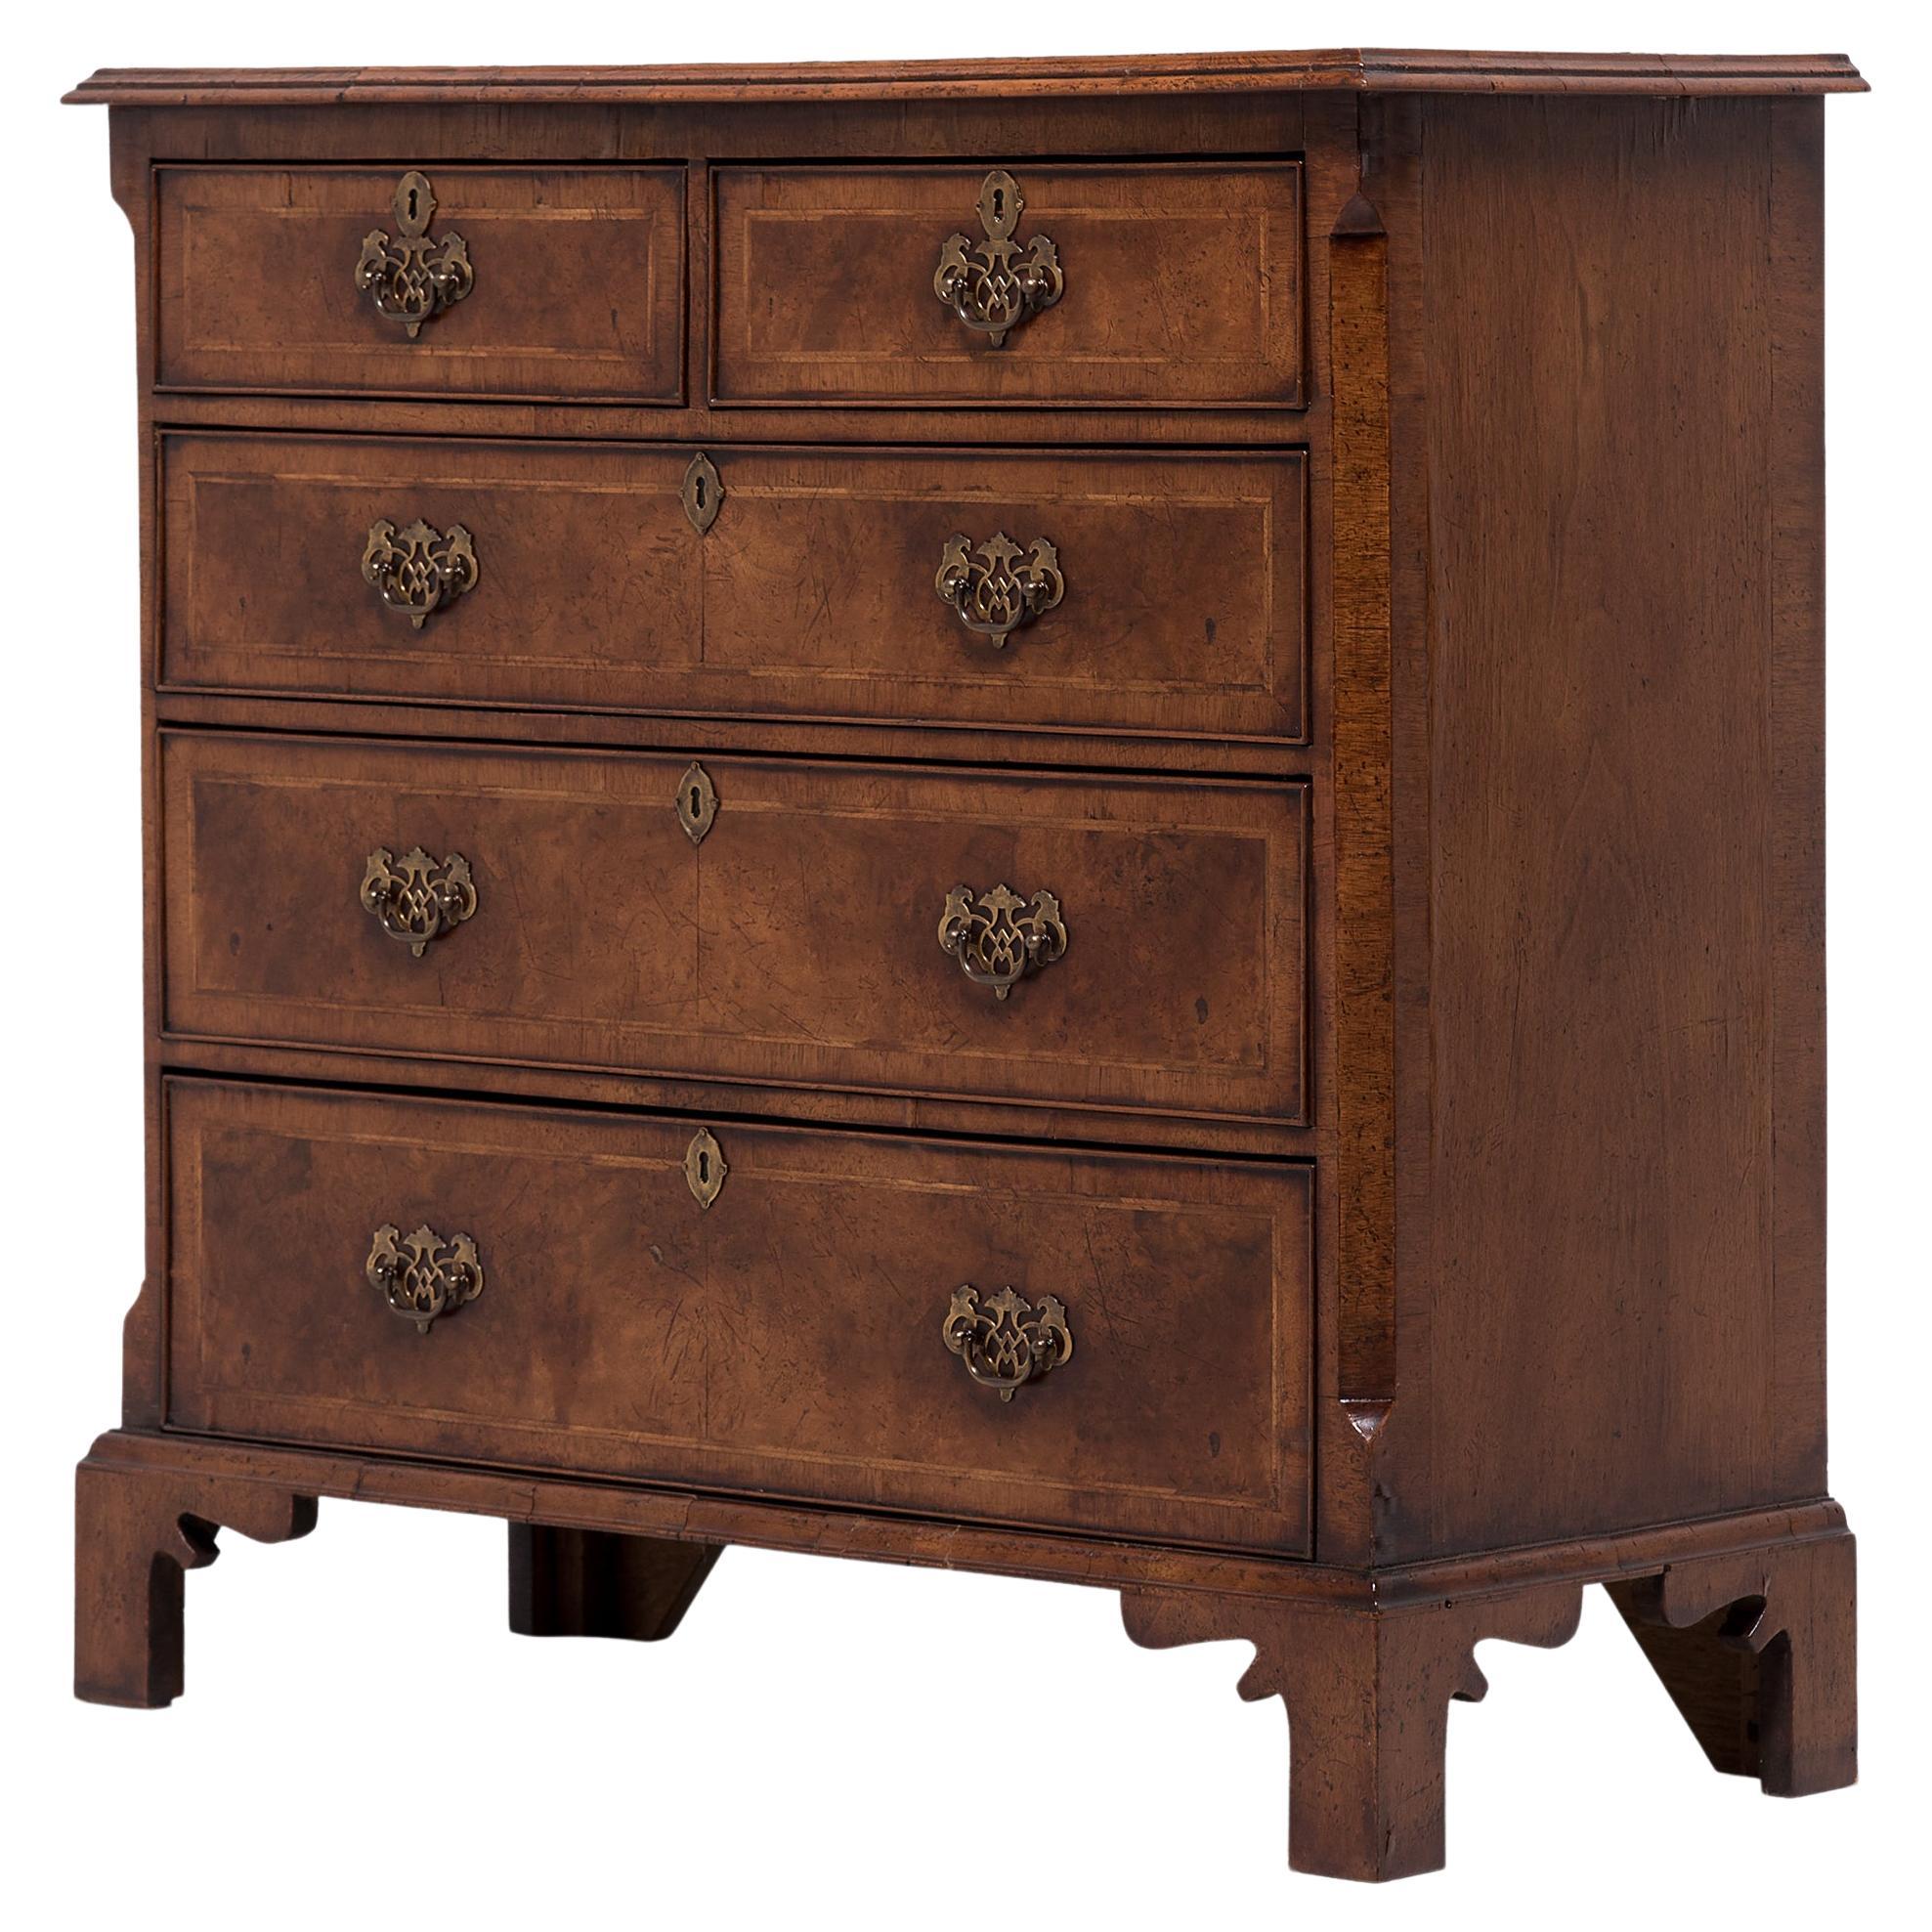 Queen Anne Style Burled Walnut Chest of Drawers, c. 1800 For Sale